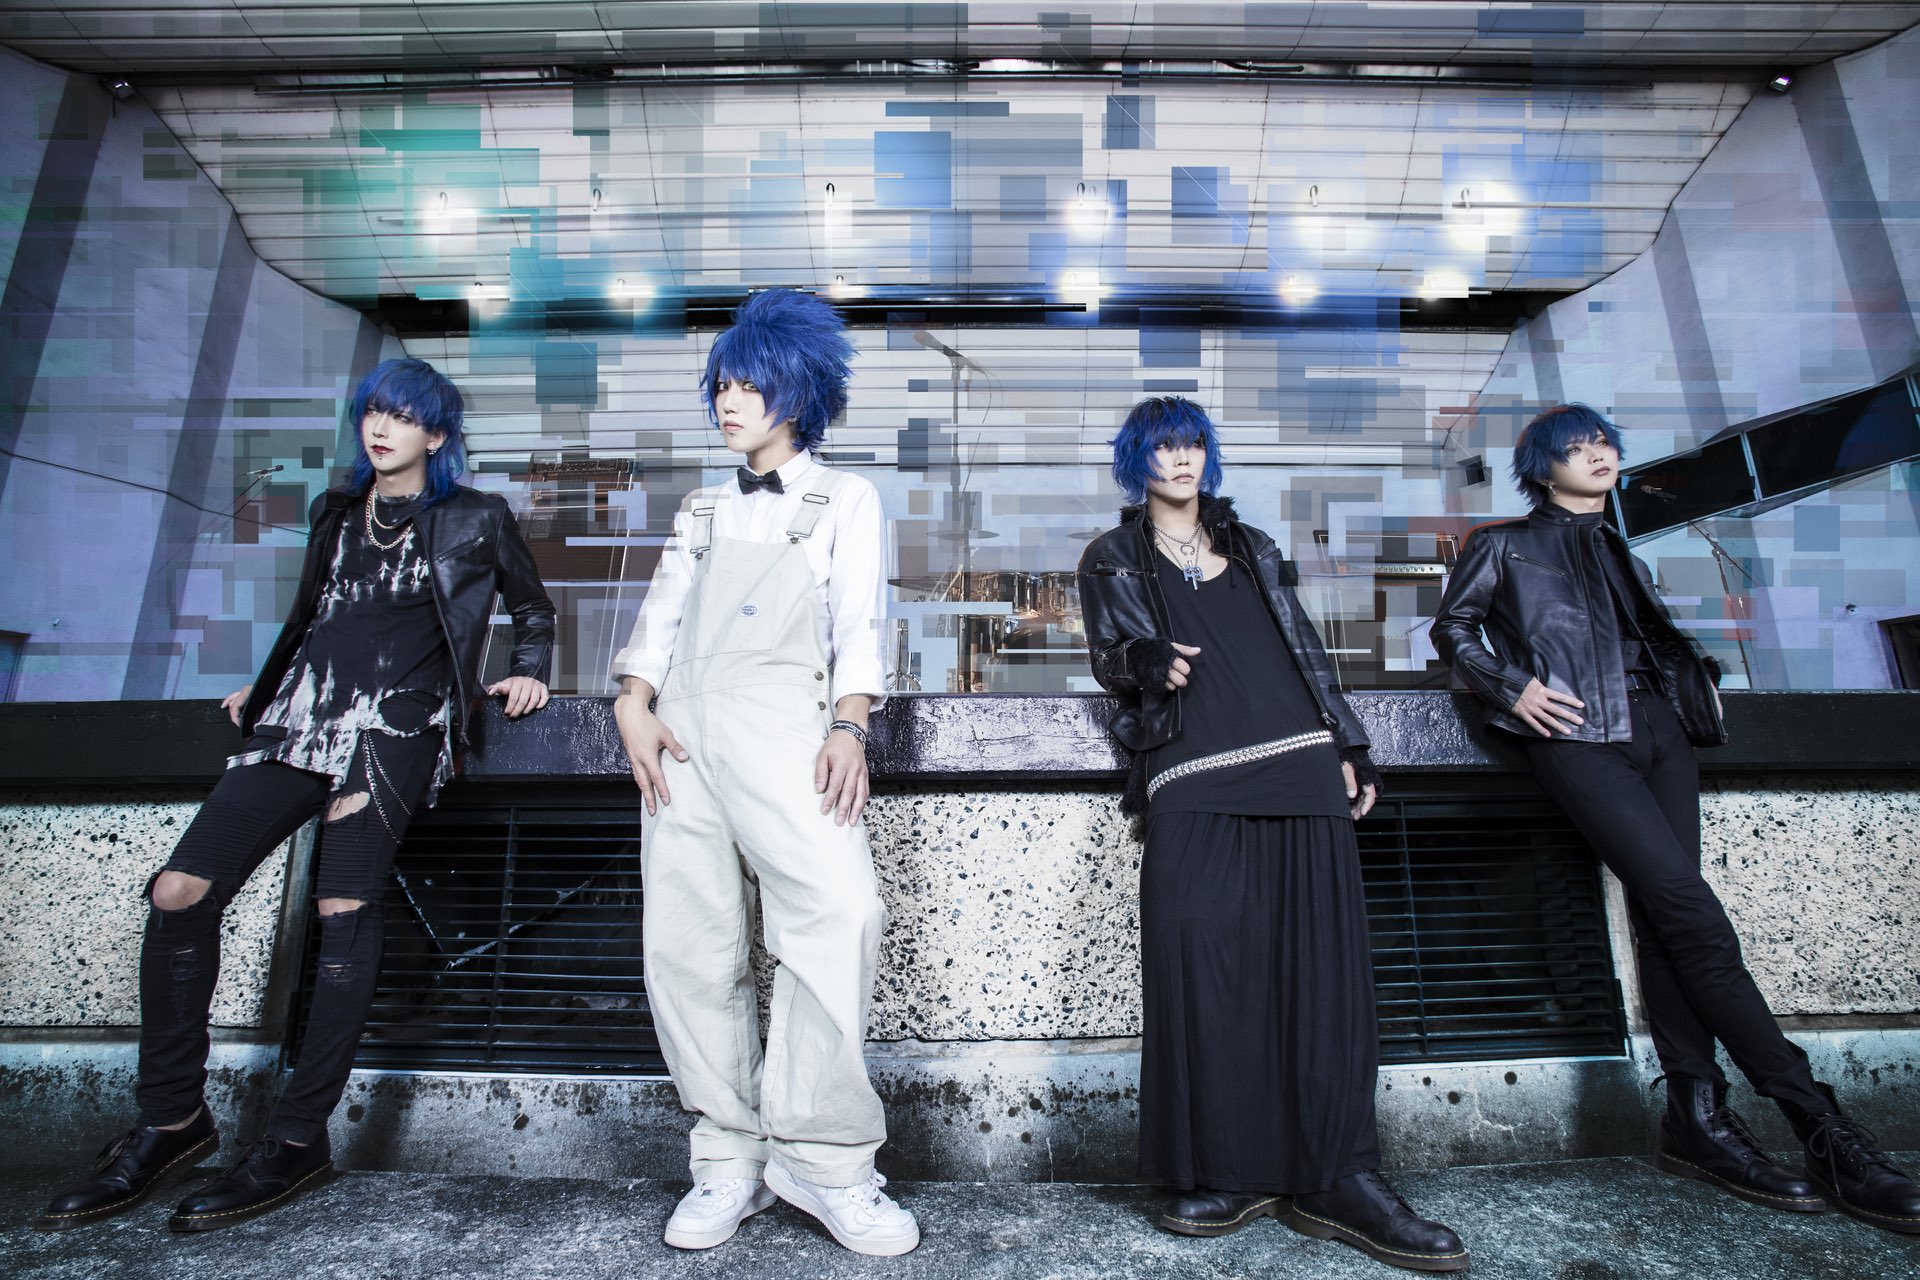 ZON – New single “Shock!!” and one-man tour